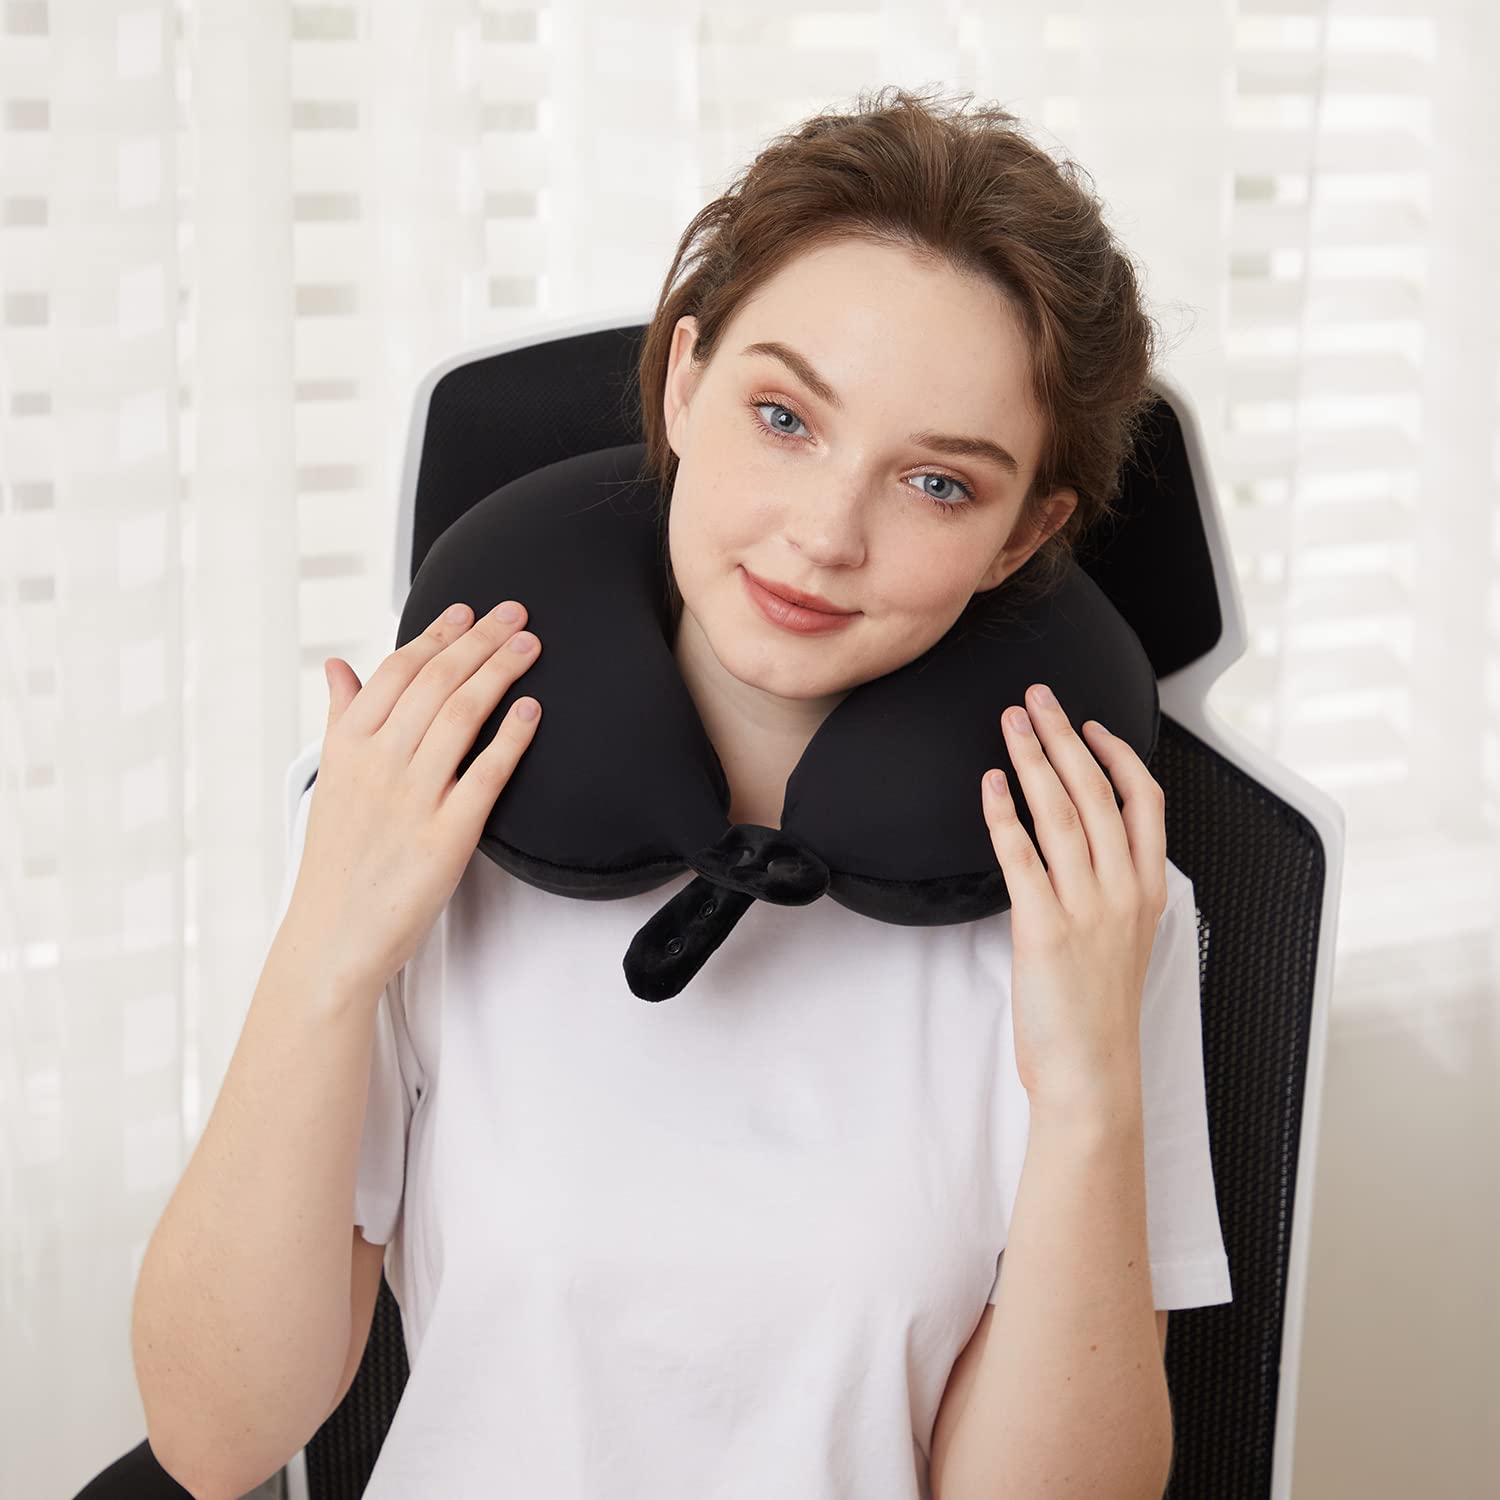 Travel Neck Pillow, Best Memory Foam Airplane Pillow for Head Support Soft Adjustable Pillow for Plane, Car & Home Recliner Use (Black)